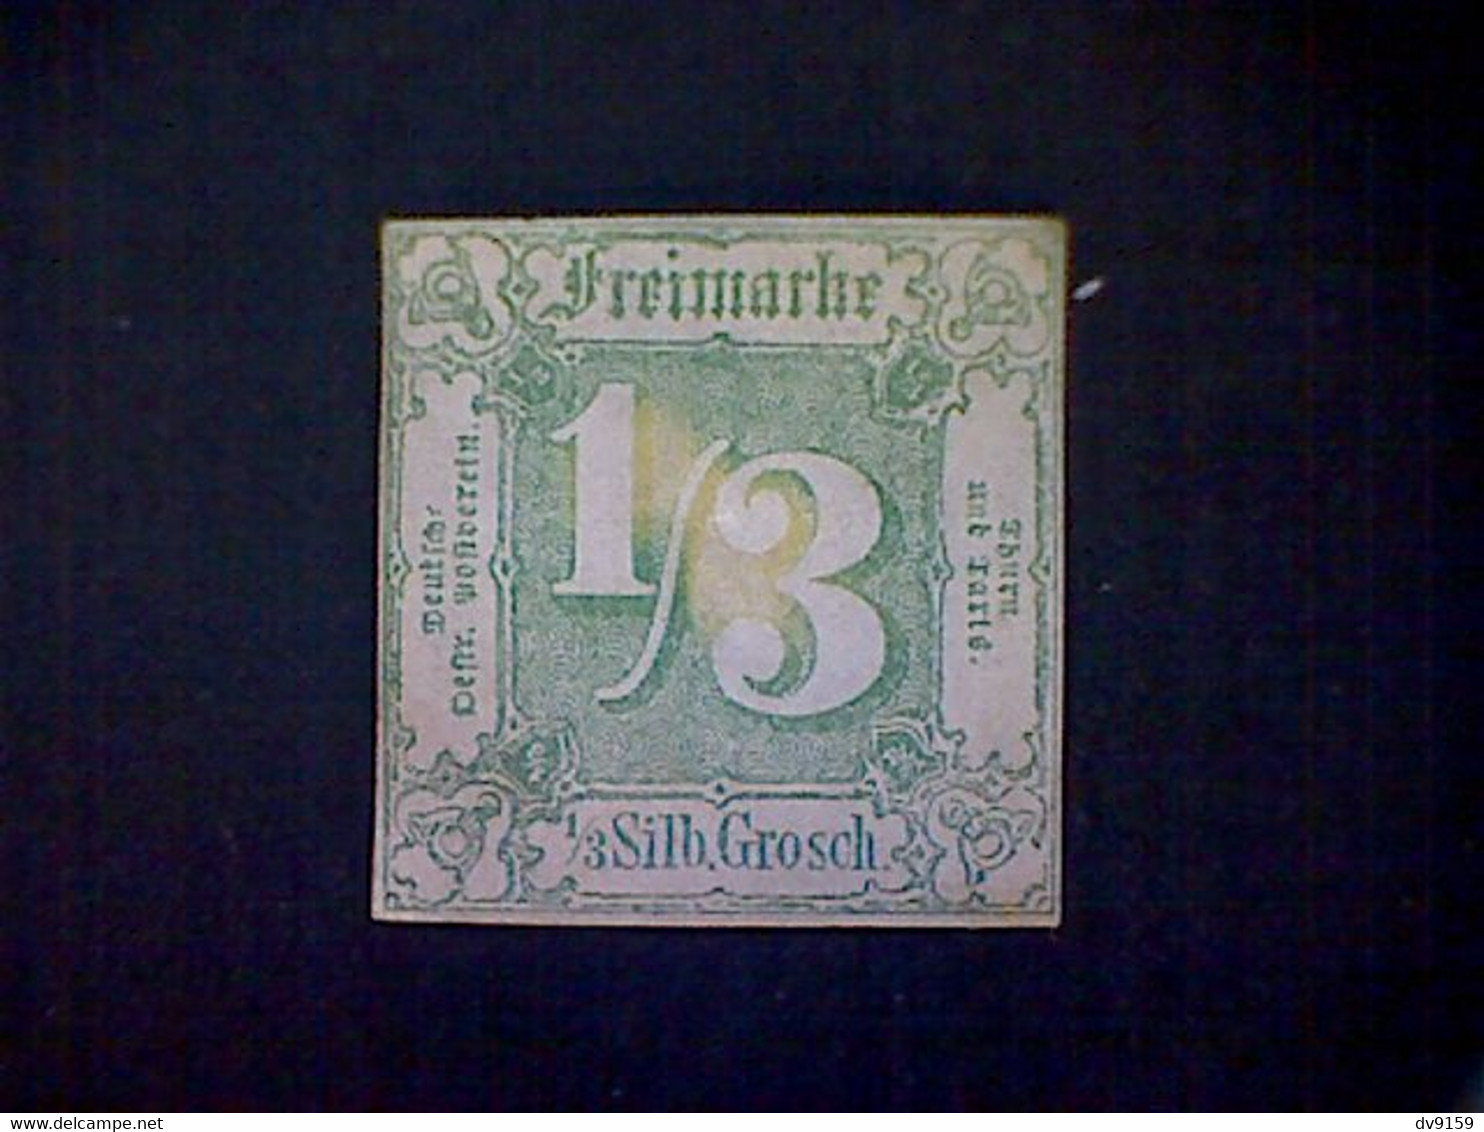 Germany (Thurn And Taxis), Scott #16, 1863, Mint (*), No Gum, 1/3 Sgr, Green - Ungebraucht